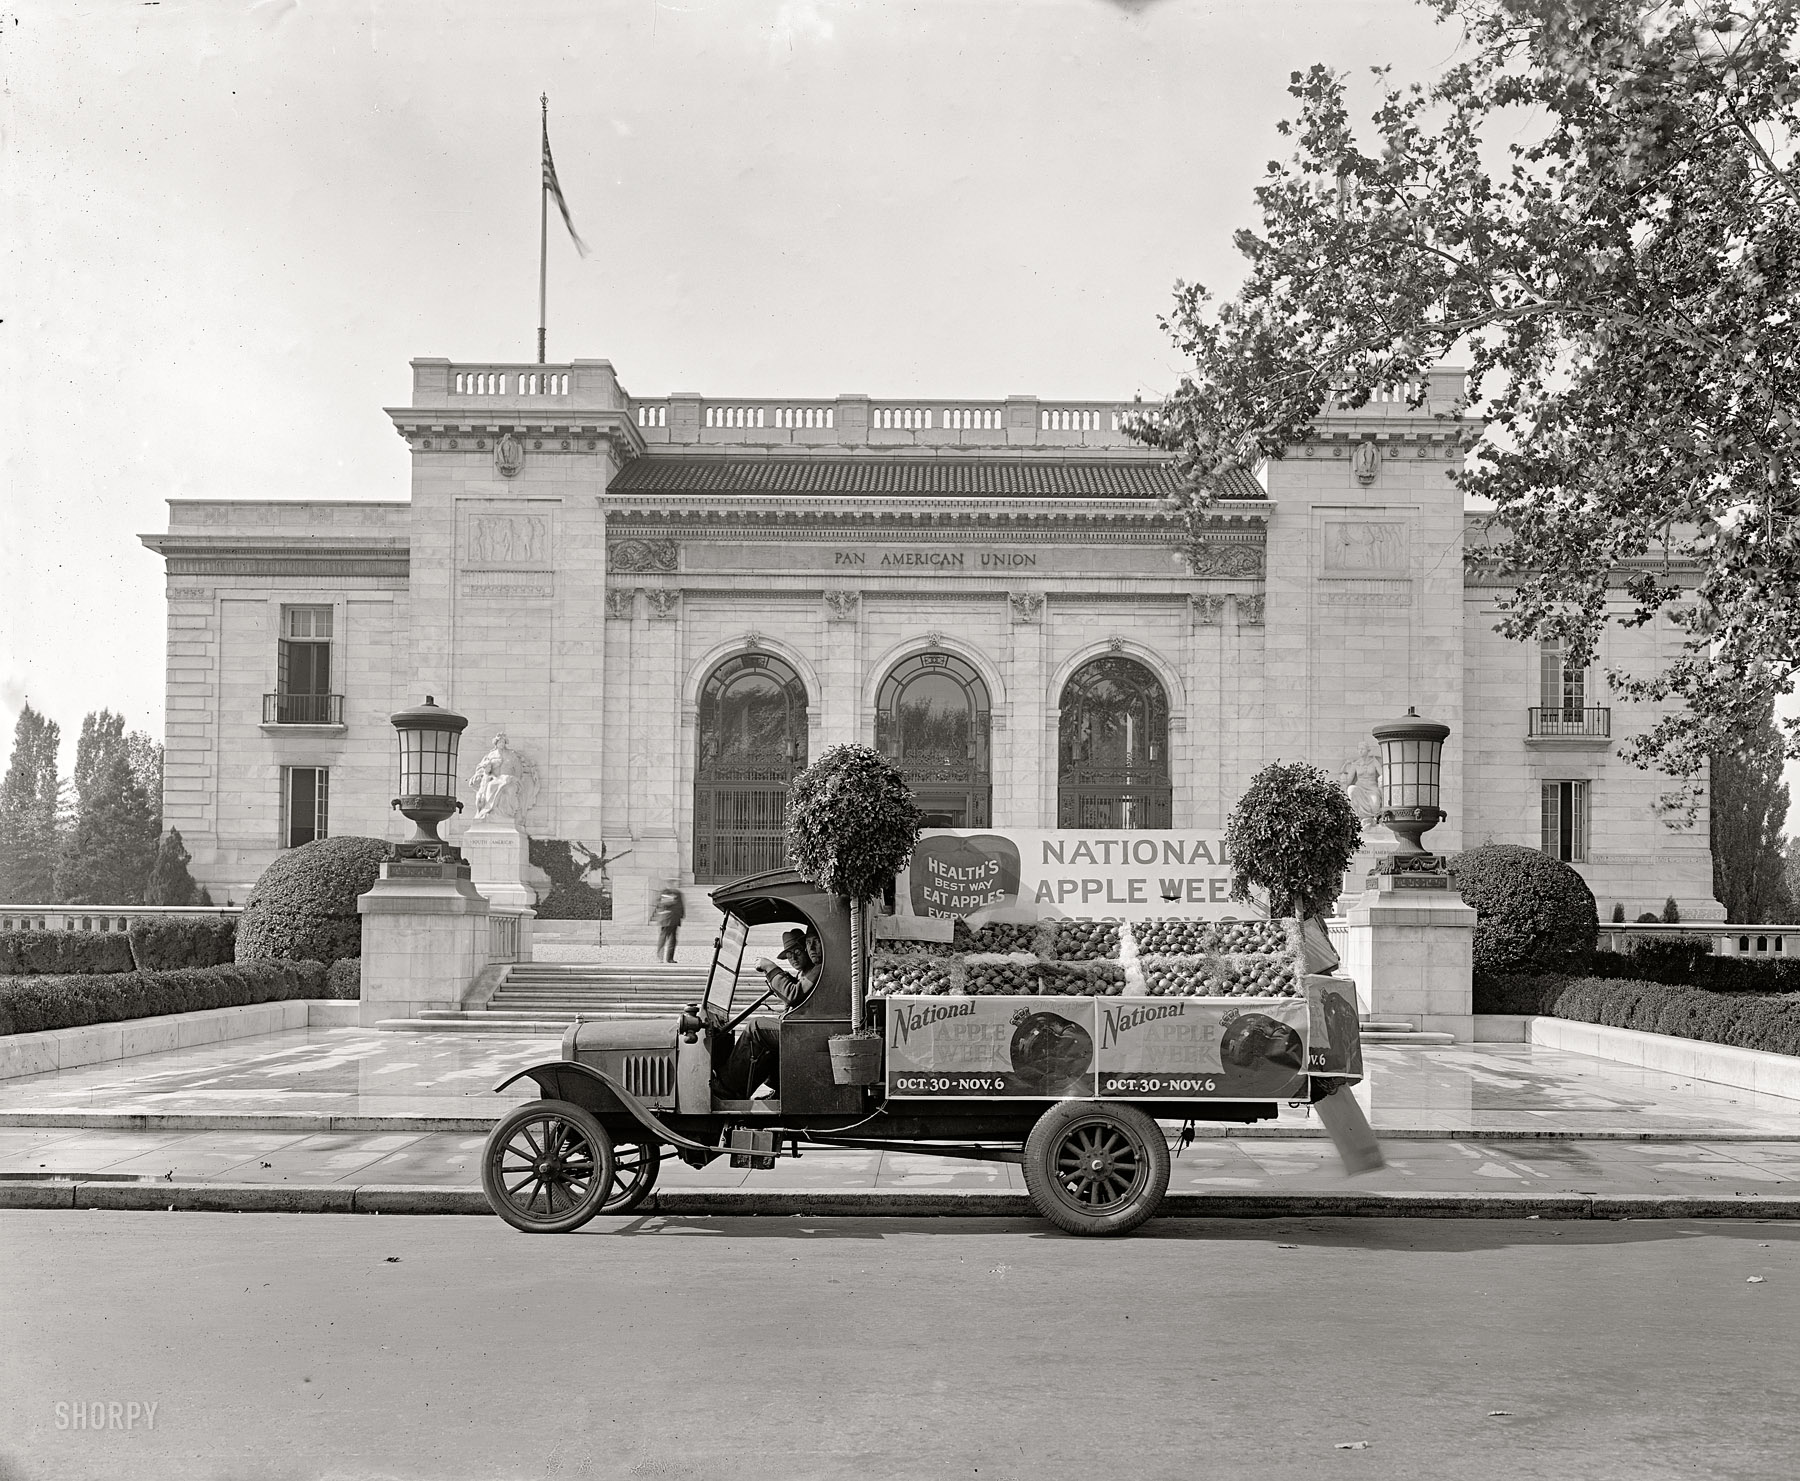 Washington, D.C., 1926. "National Apple Week Association float at Pan American Union." National Photo Company Collection glass negative. View full size.